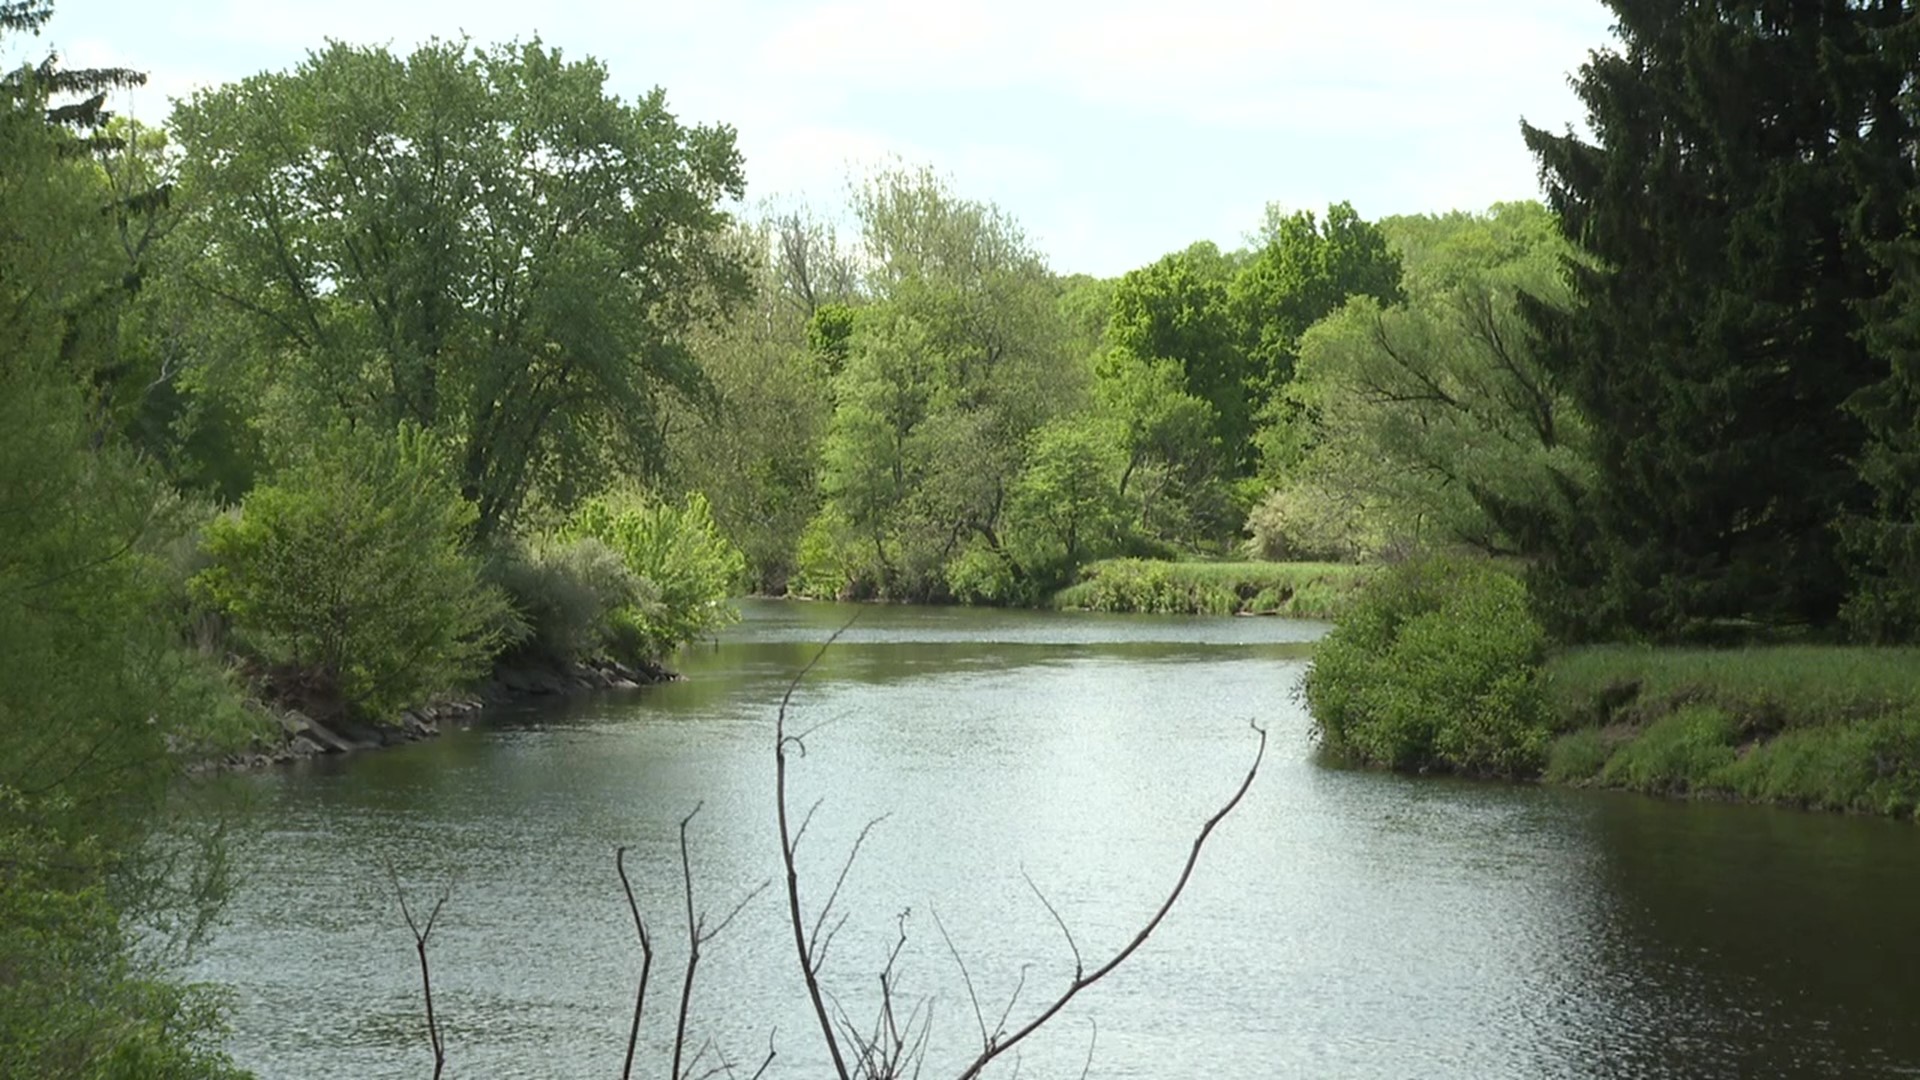 A river trail project in Wayne County will soon be taking shape to provide river access for fishing, kayaking, and other outdoor activities.